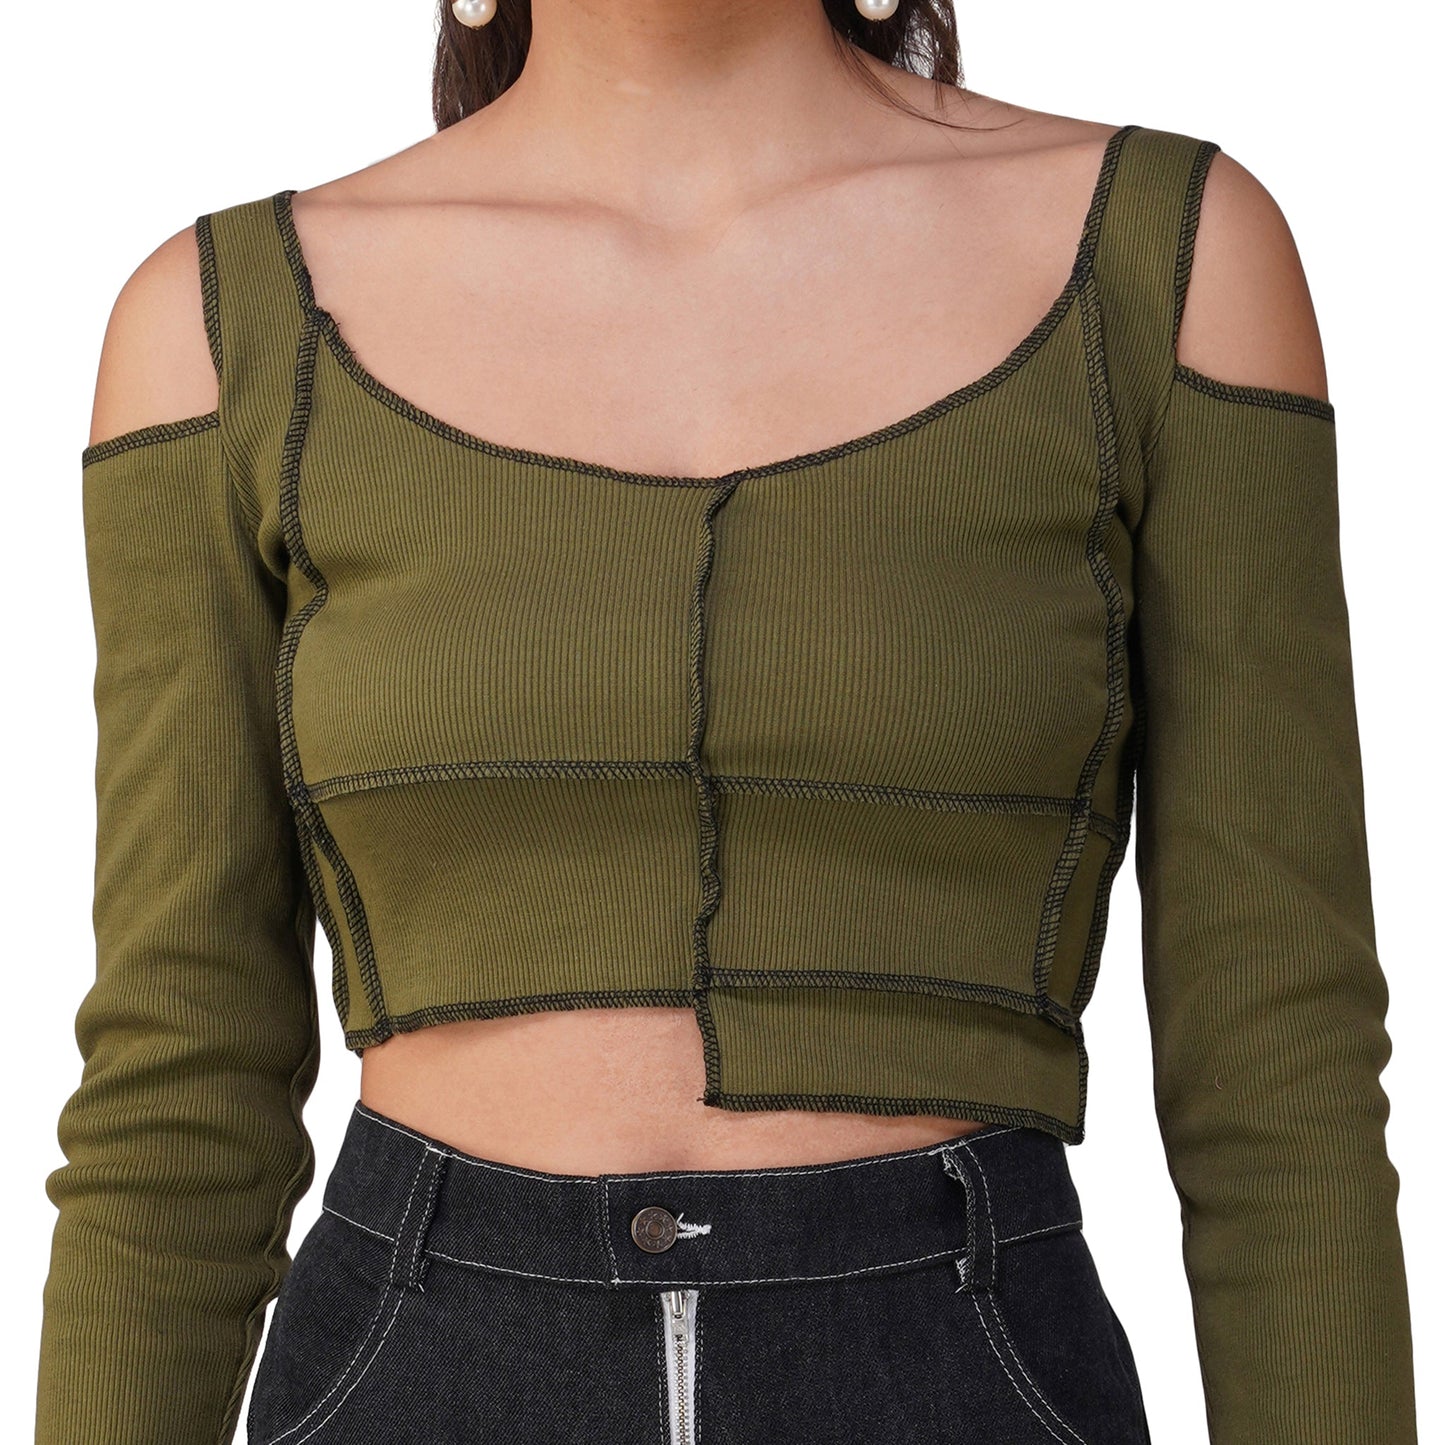 SLAY. Women's Contrast Stitch Olive Cold Shoulder Rib Full Sleeves Top & Jeans Co-ord Set